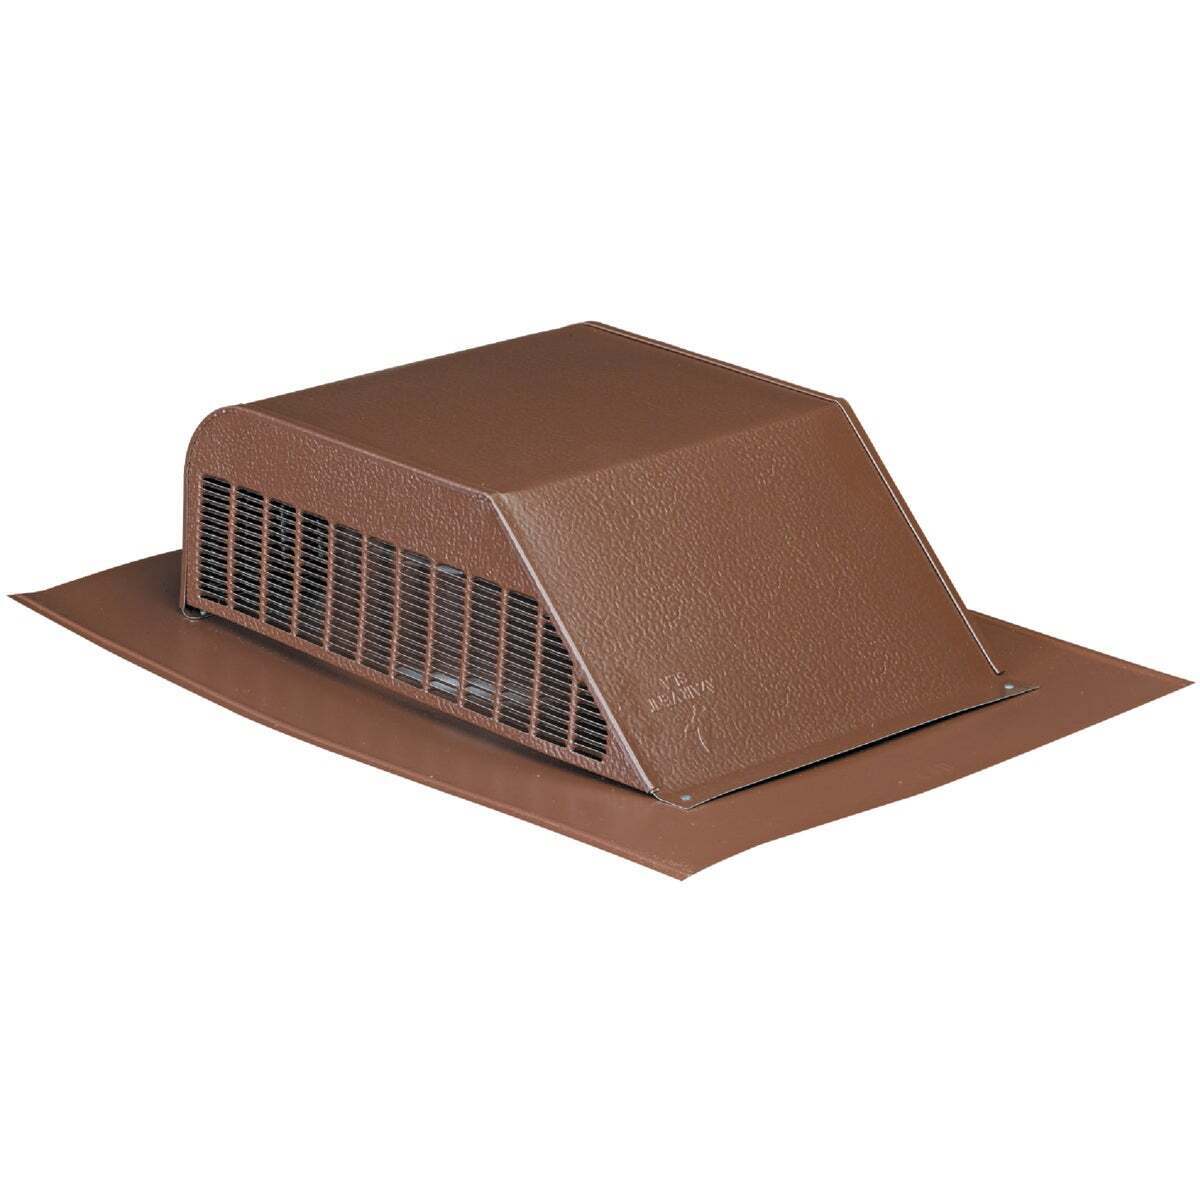 Airhawk 50 In. Brown Galvanized Steel Slant Back Roof Vent RVG55086 Pack of 6